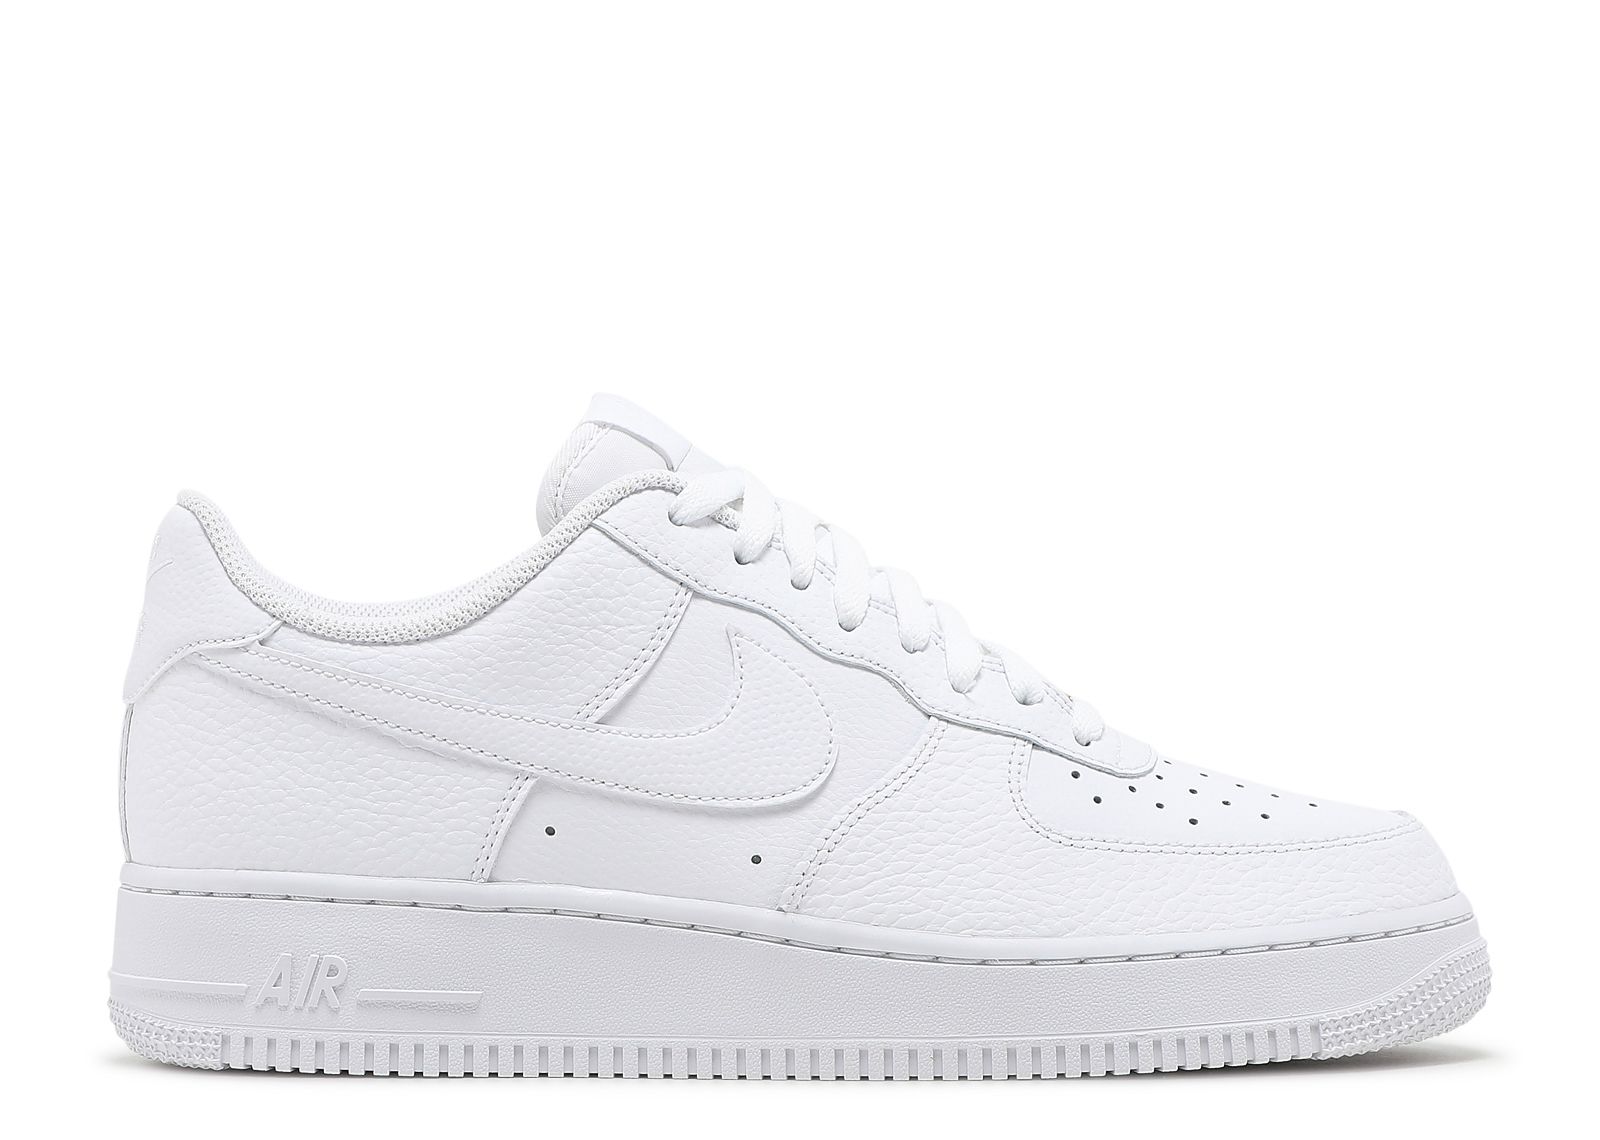 Nike Air Force 1 Low White CZ0326-101 Release